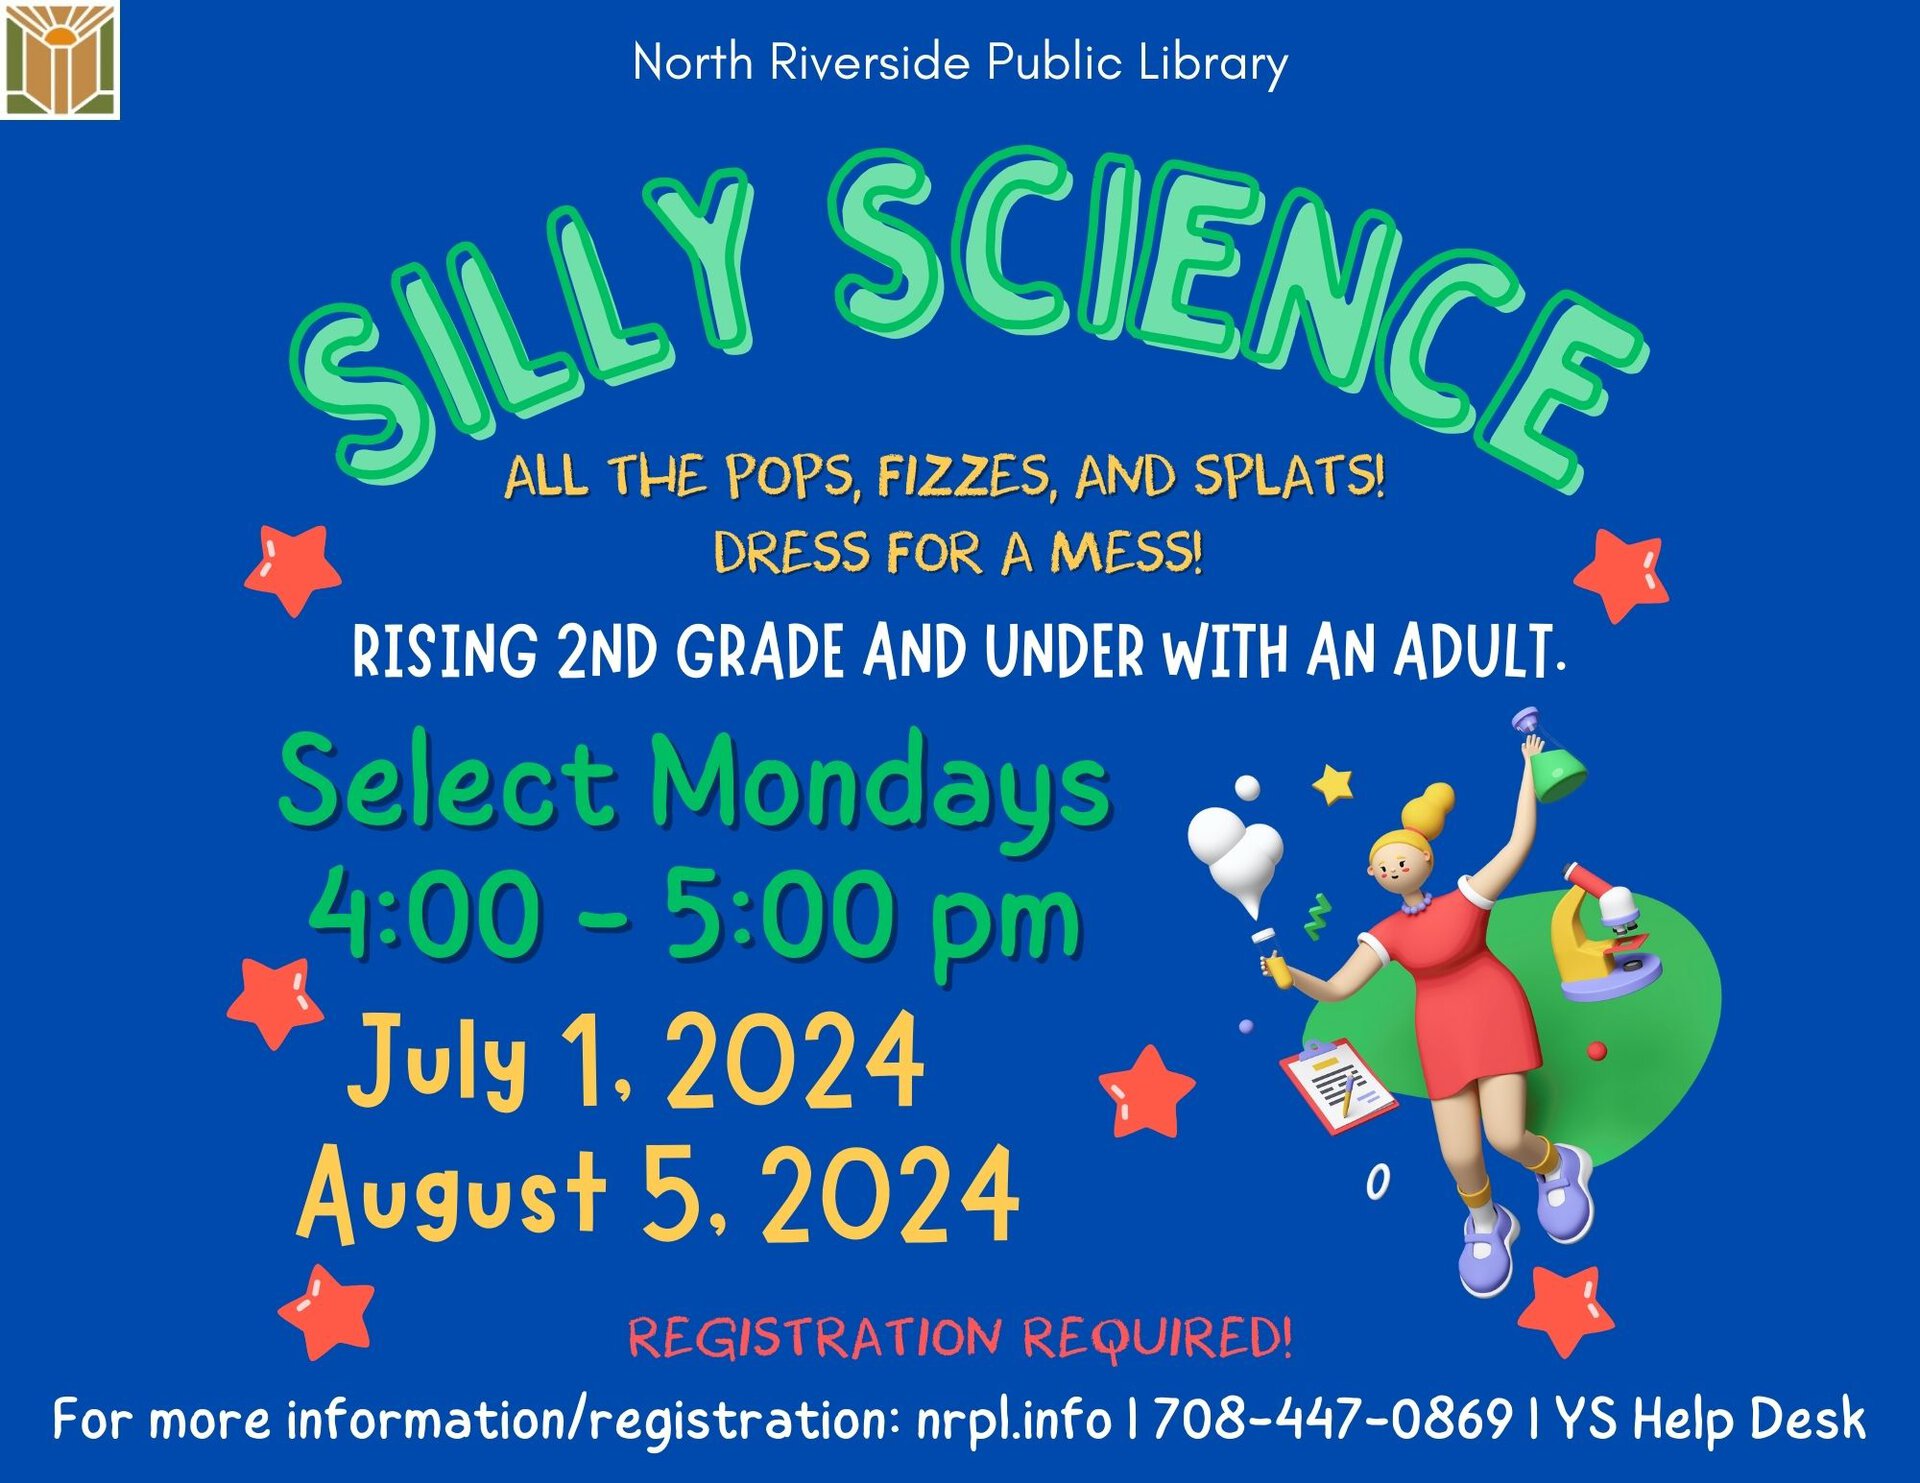 Silly Science. Select Mondays 4 - 5 pm. July 1 & August 5. All the pops, fizzes, and splat! Dress accordingly! For rising 2nd graders and under with an adult.